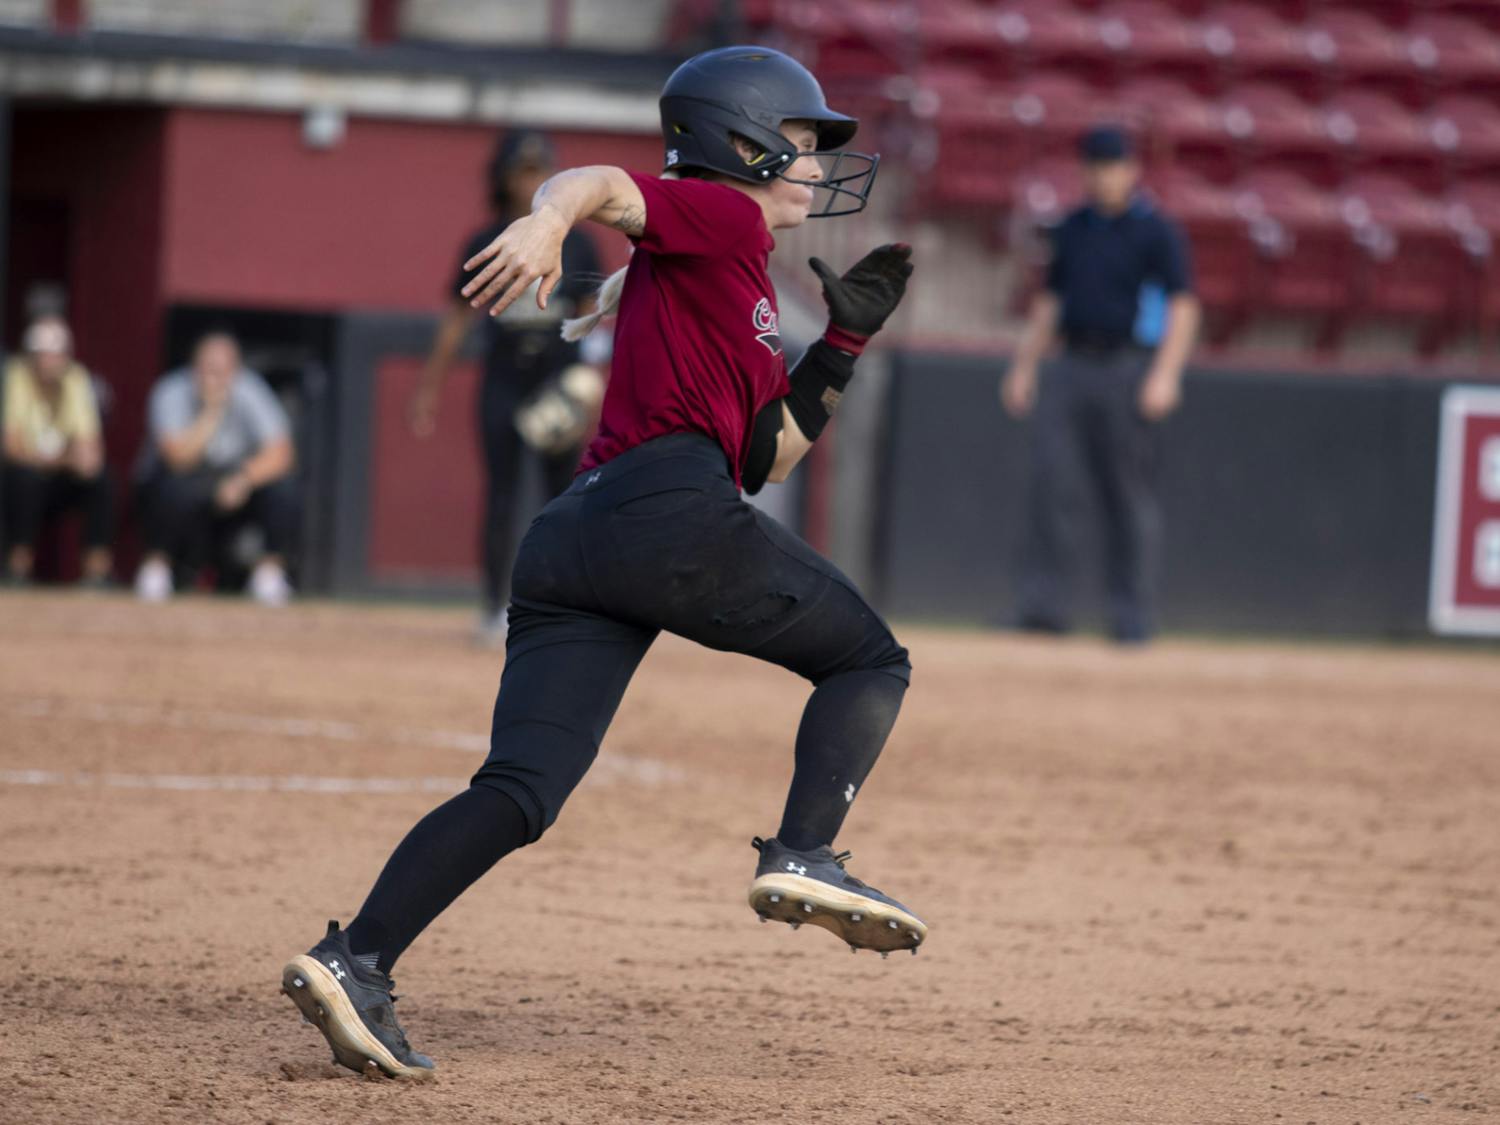 Sophomore pitcher Jori Heard rounds towards second base after an early hit against Wofford on Oct. 7, 2023. Heard's double helped lead South Carolina to a 14-0 win.